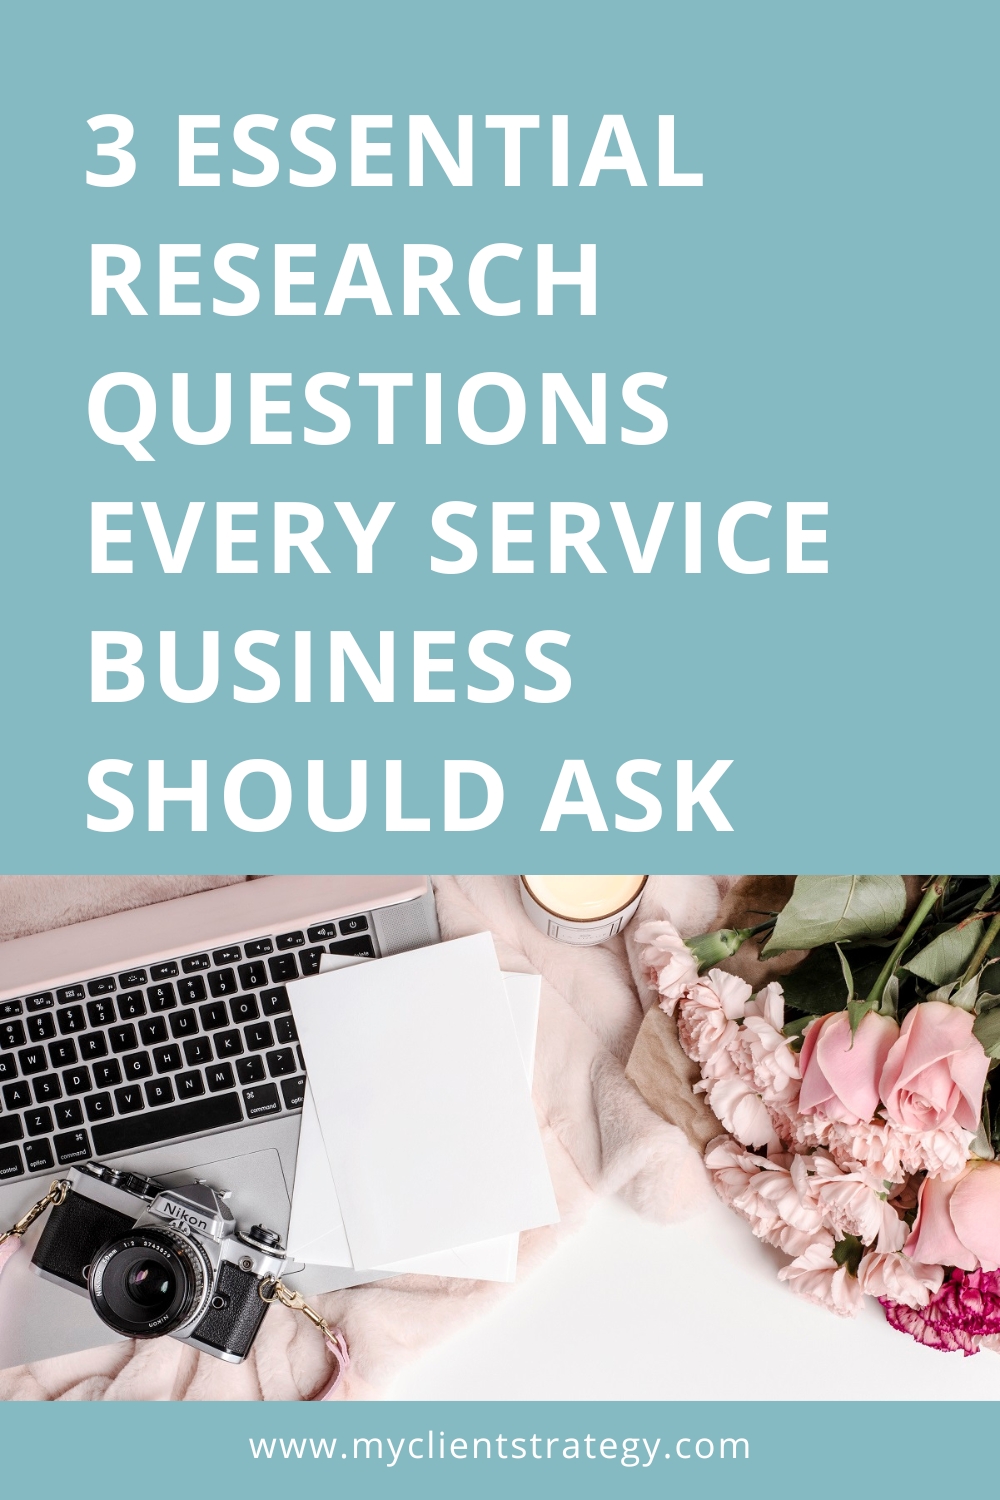 Essential research questions every service business should ask